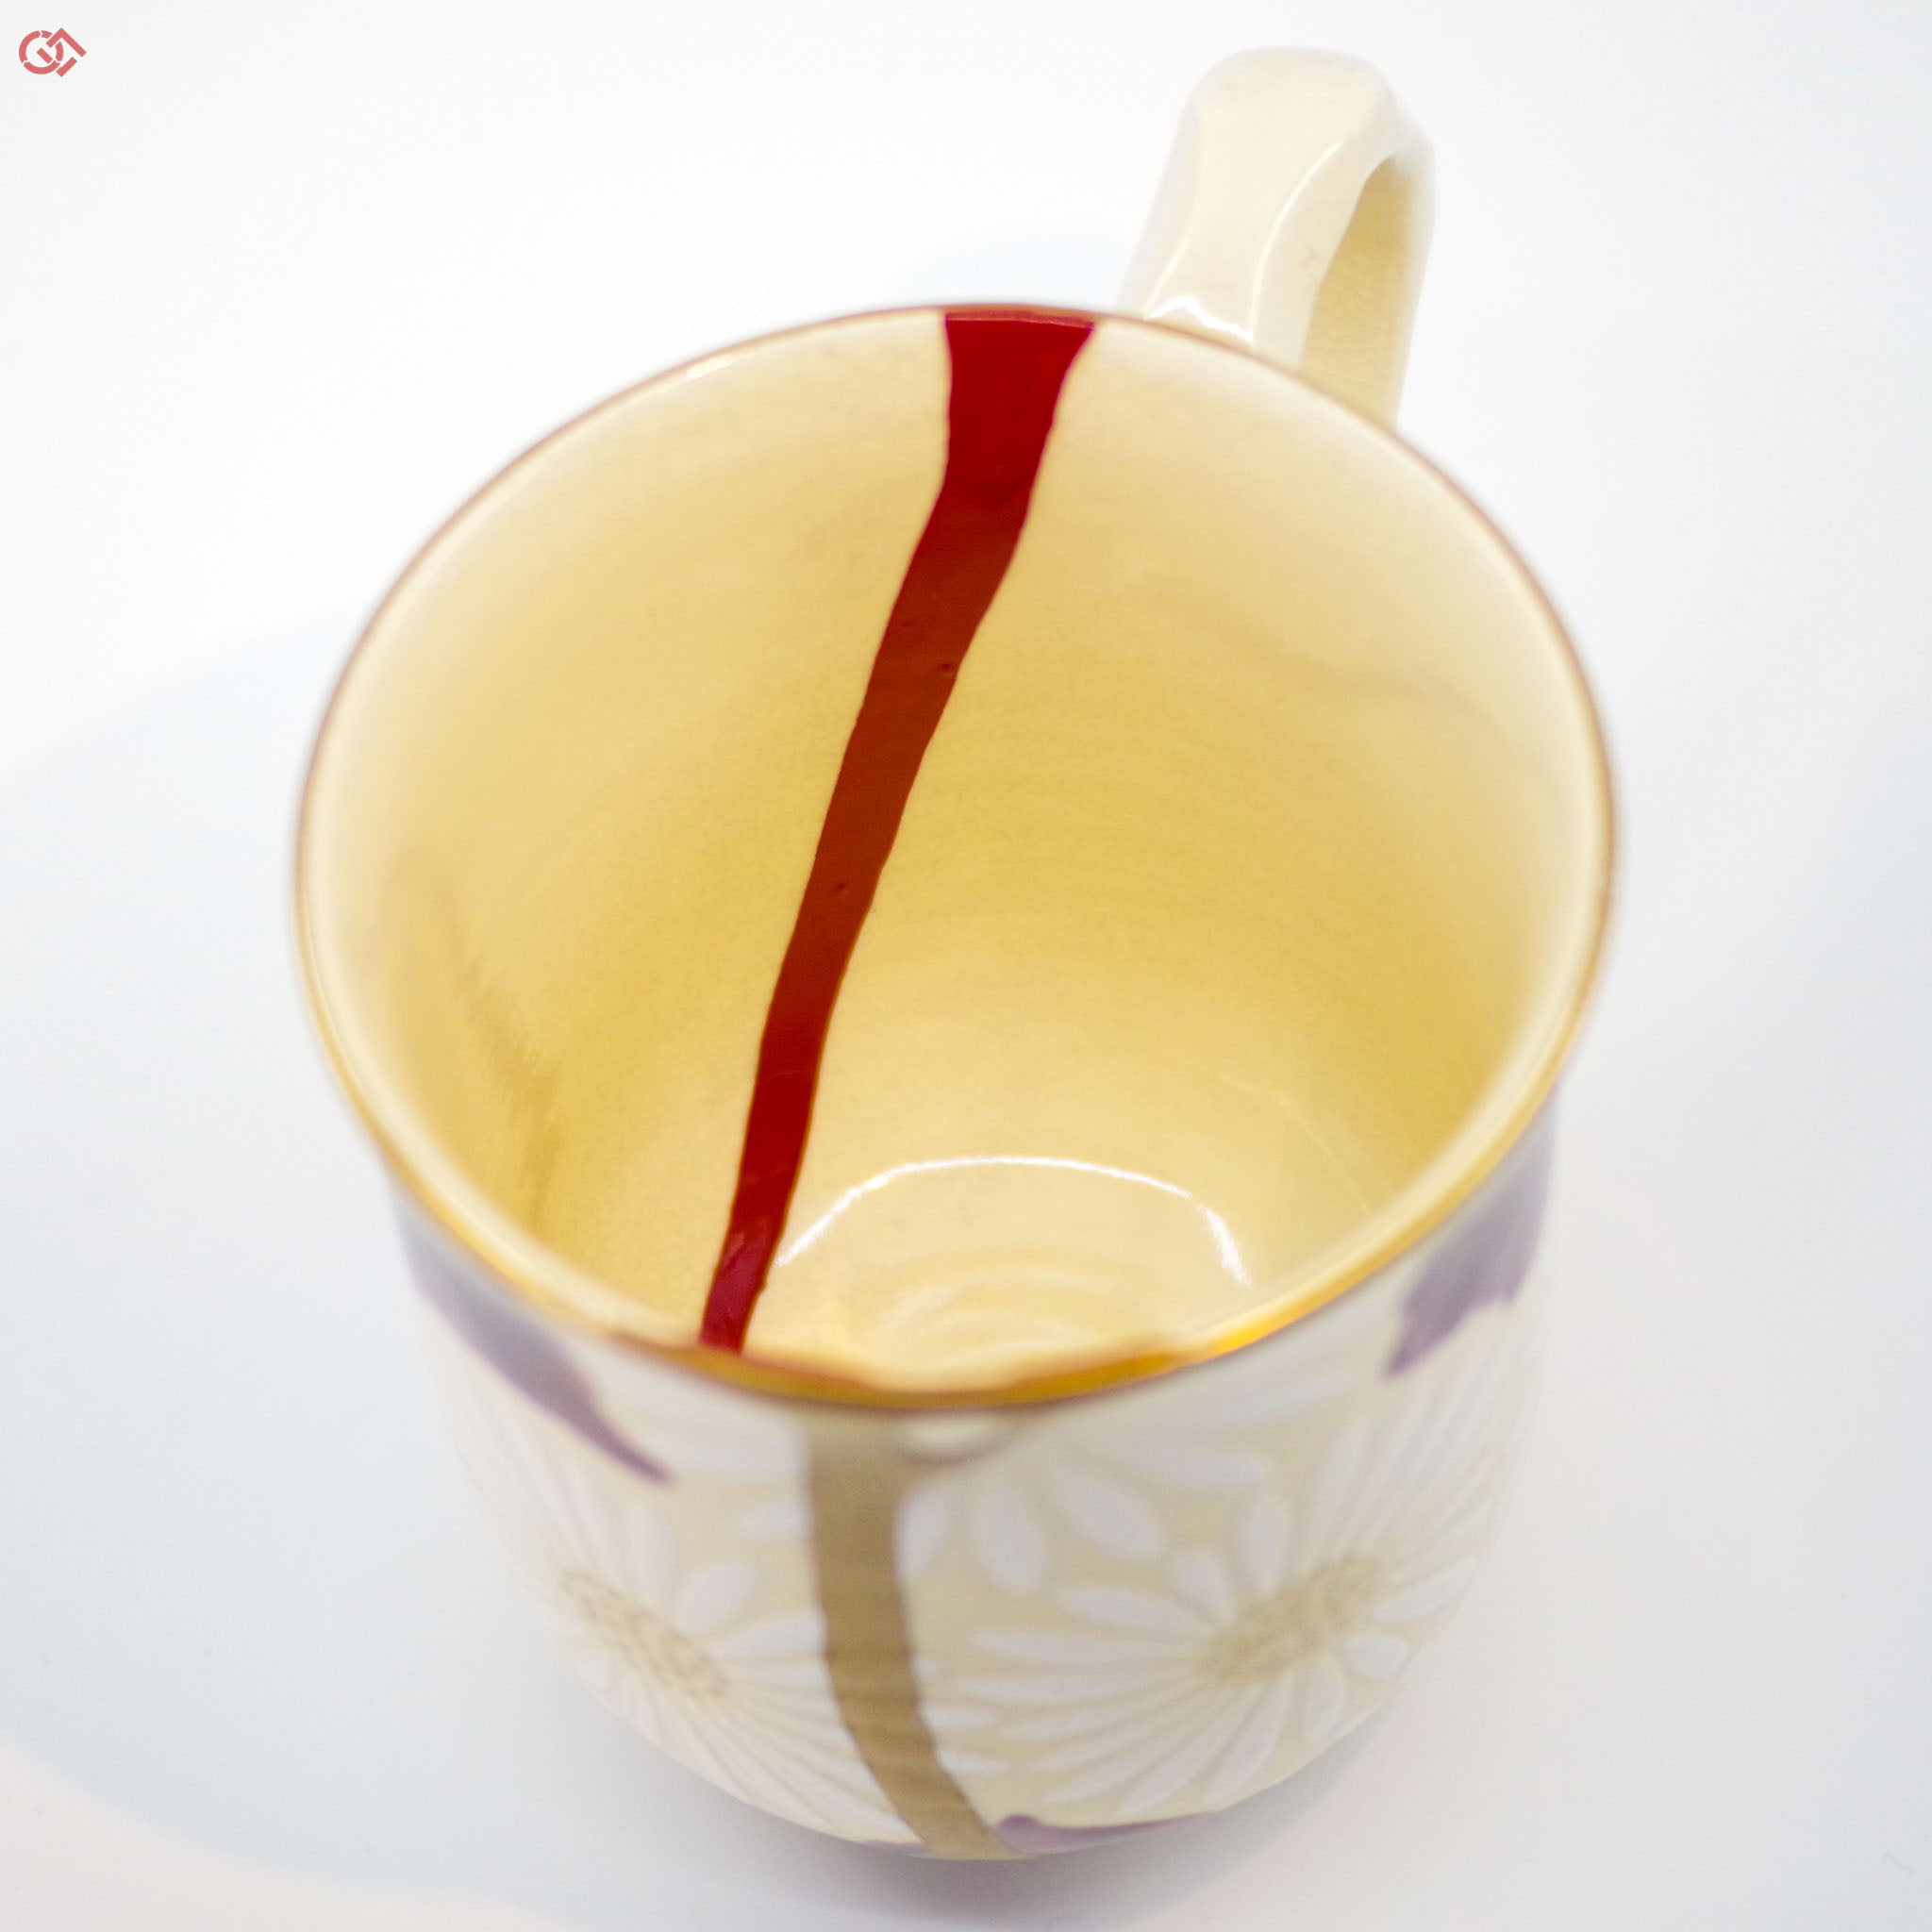 Enlarged view of Authentic Kintsugi pottery